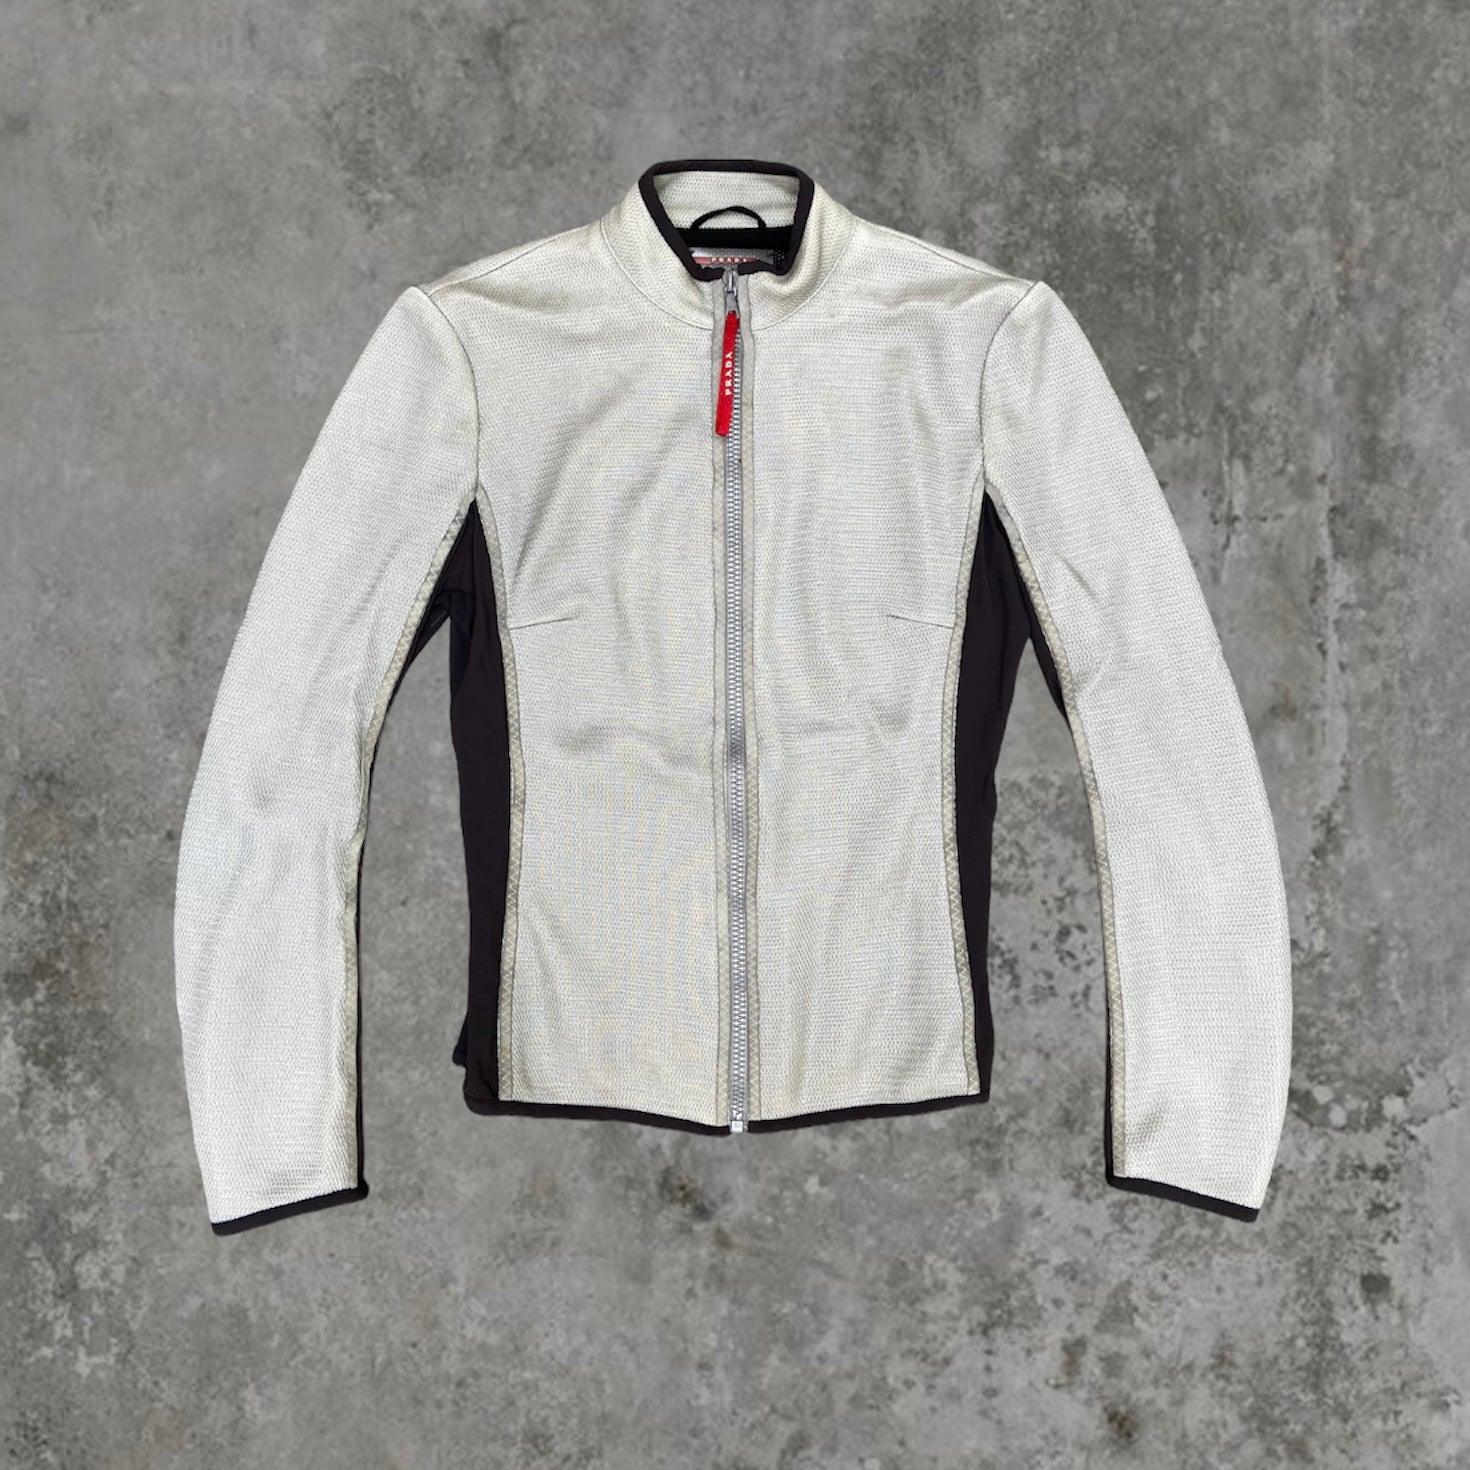 PRADA SPORT FITTED NYLON JACKET - Known Source